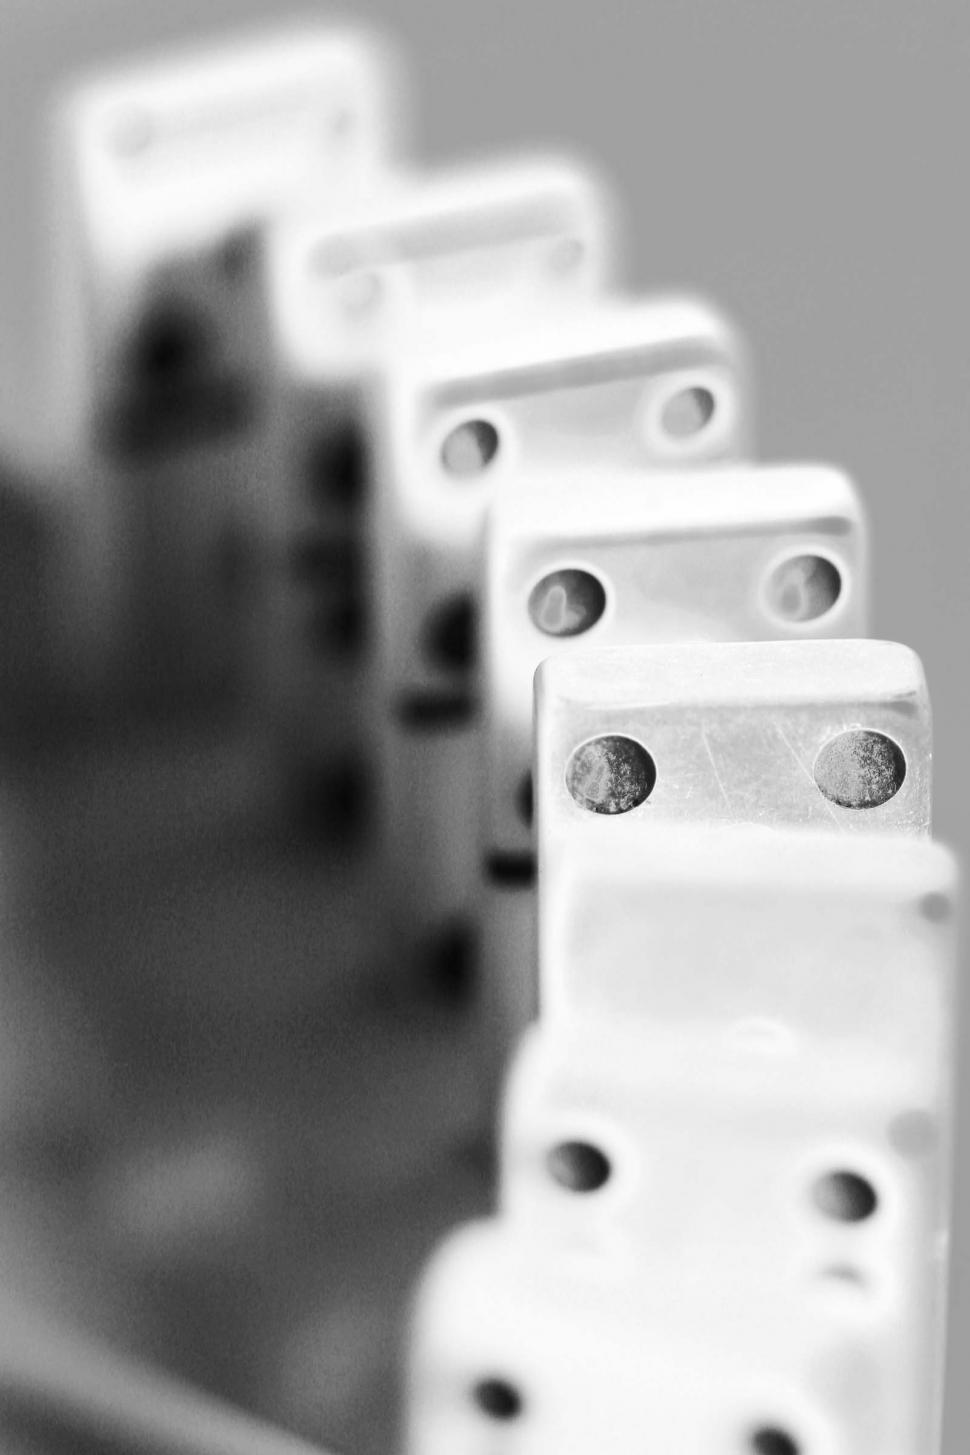 Download Free Stock Photo of dominos games sequence chain reaction falling precarious dots standing black and white glowing 